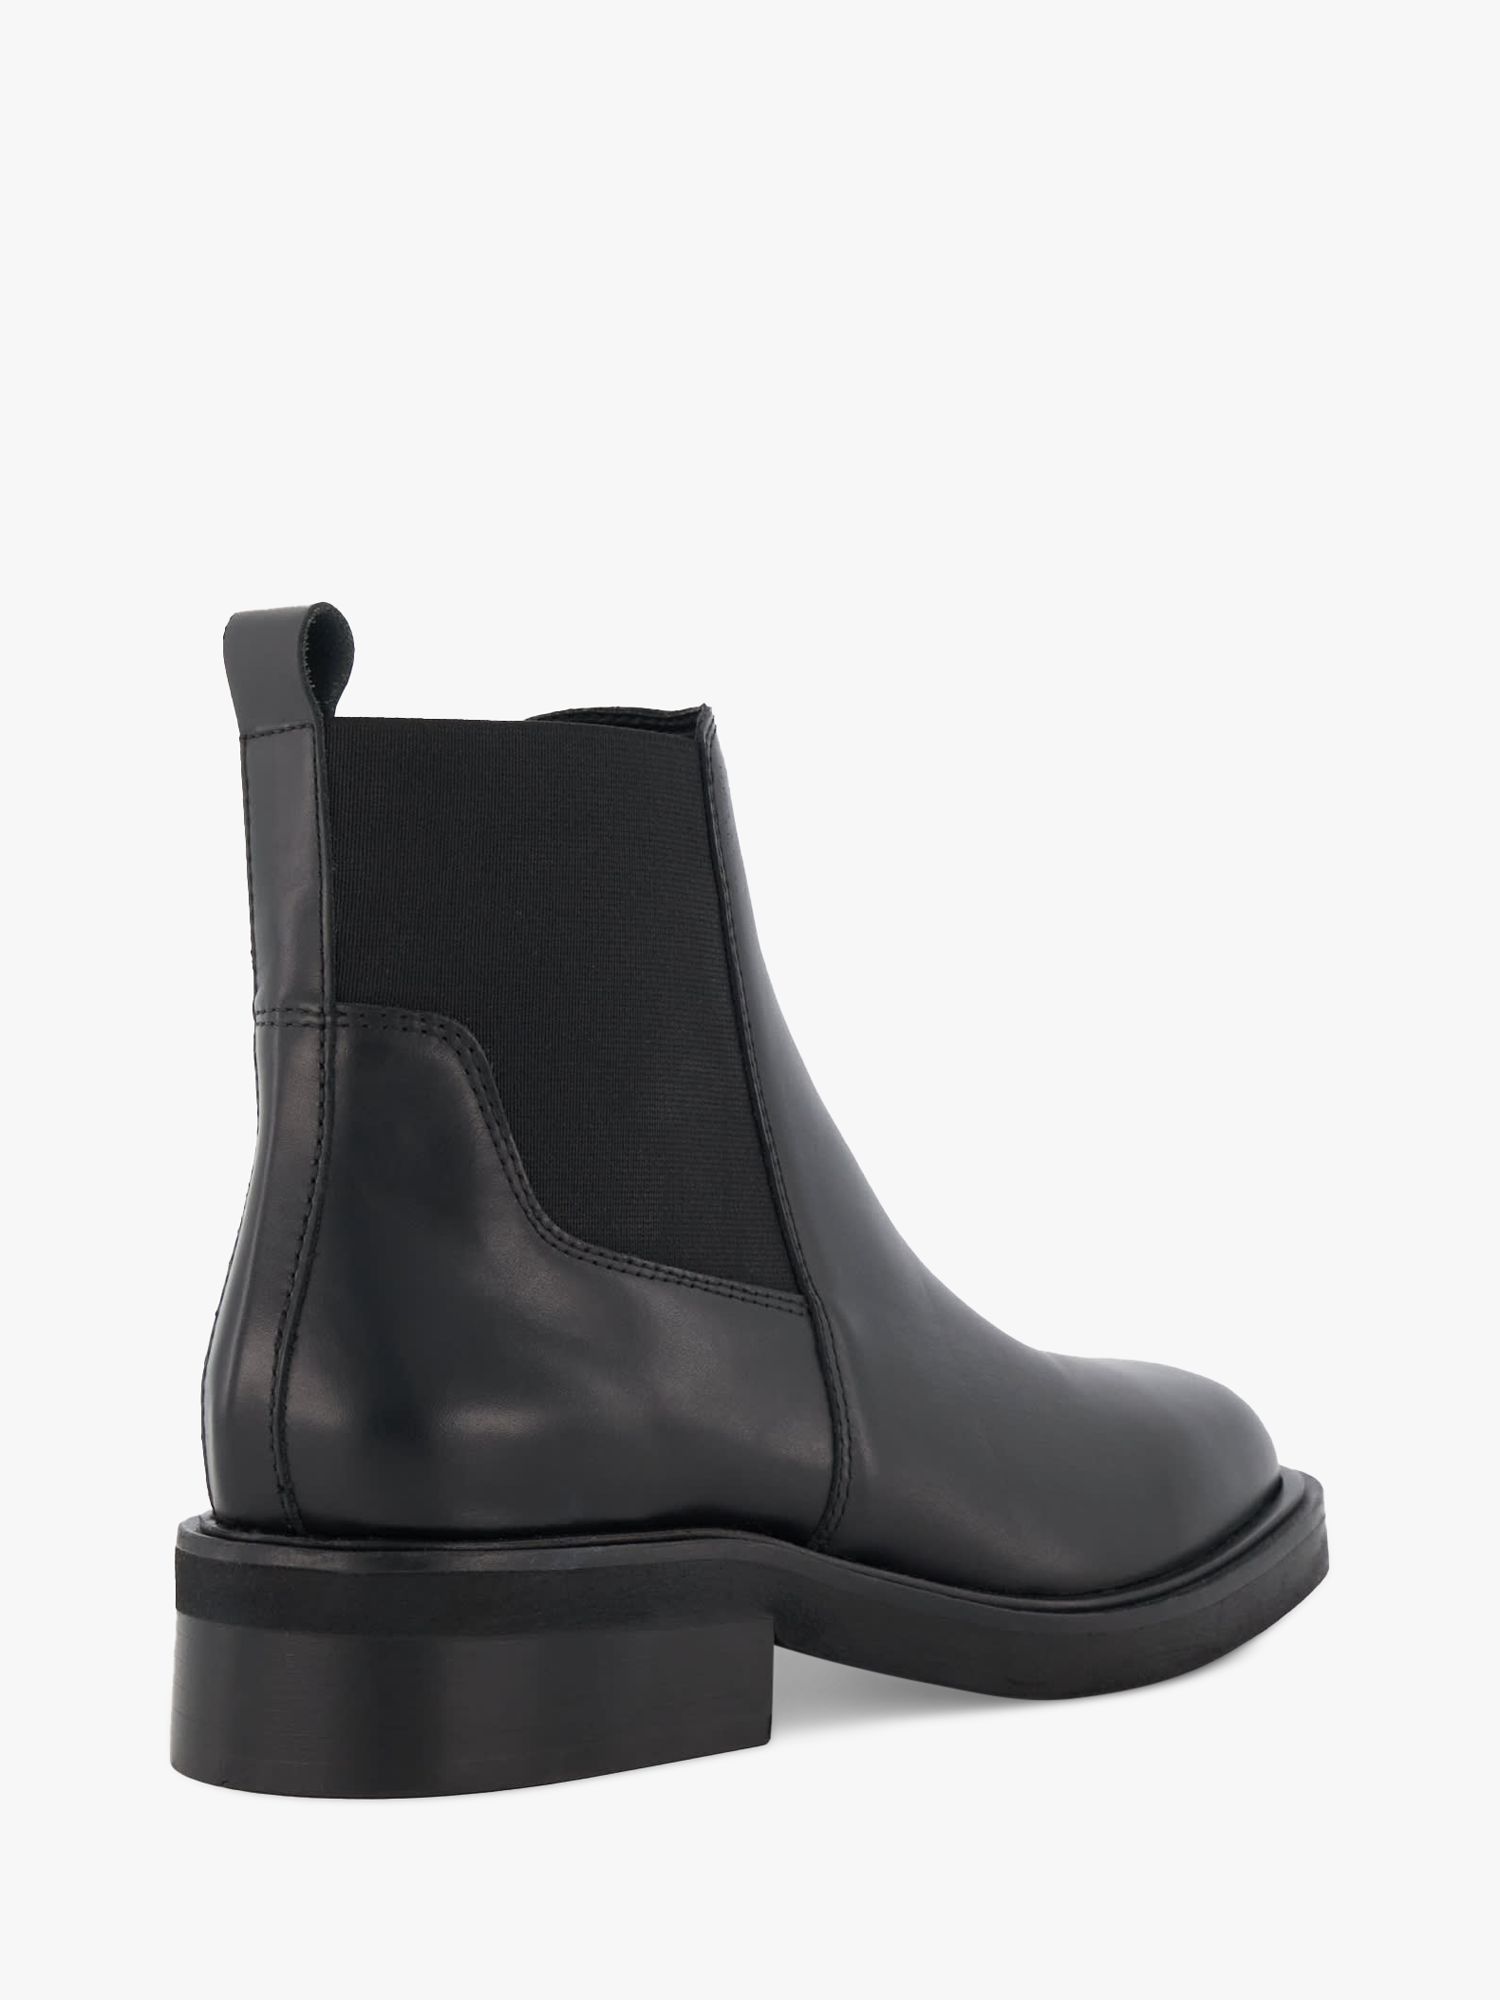 Dune Penney Leather Chelsea Boots, Black at John Lewis & Partners